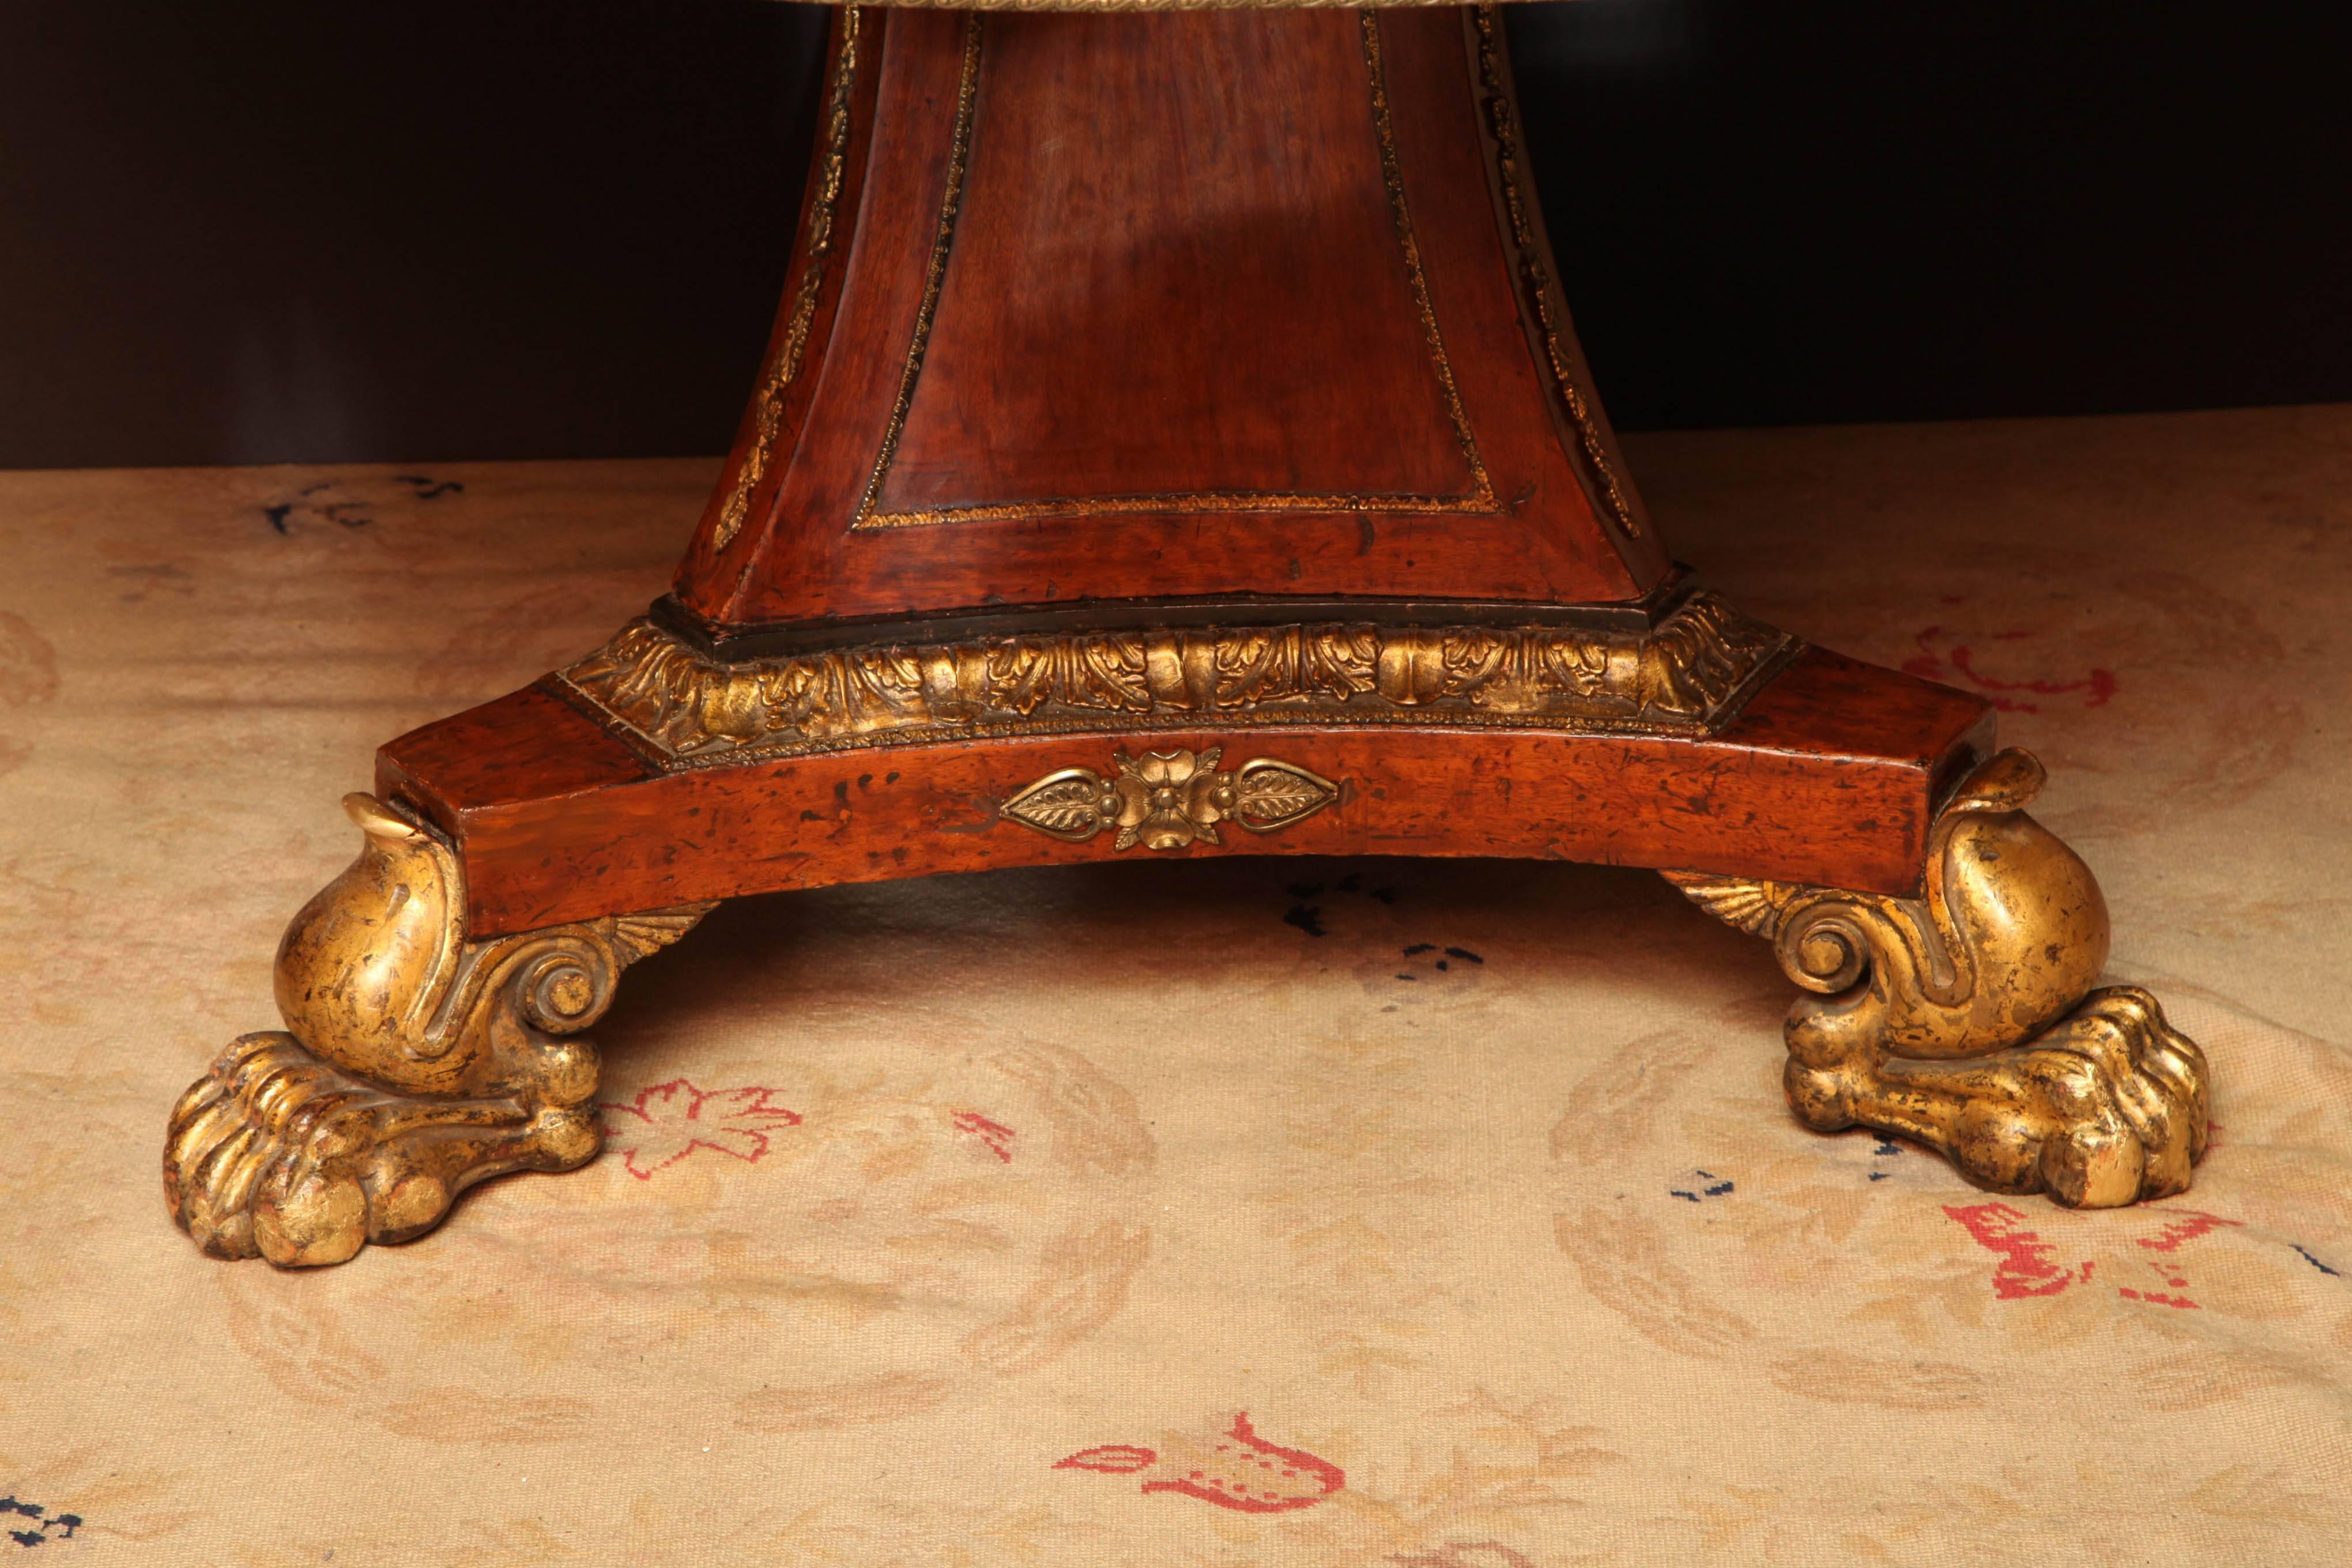 Regency mahogany tilt-top centre table with calamander wood and brass banded edge on an incurved tripartite base with robust gilt paw feet.